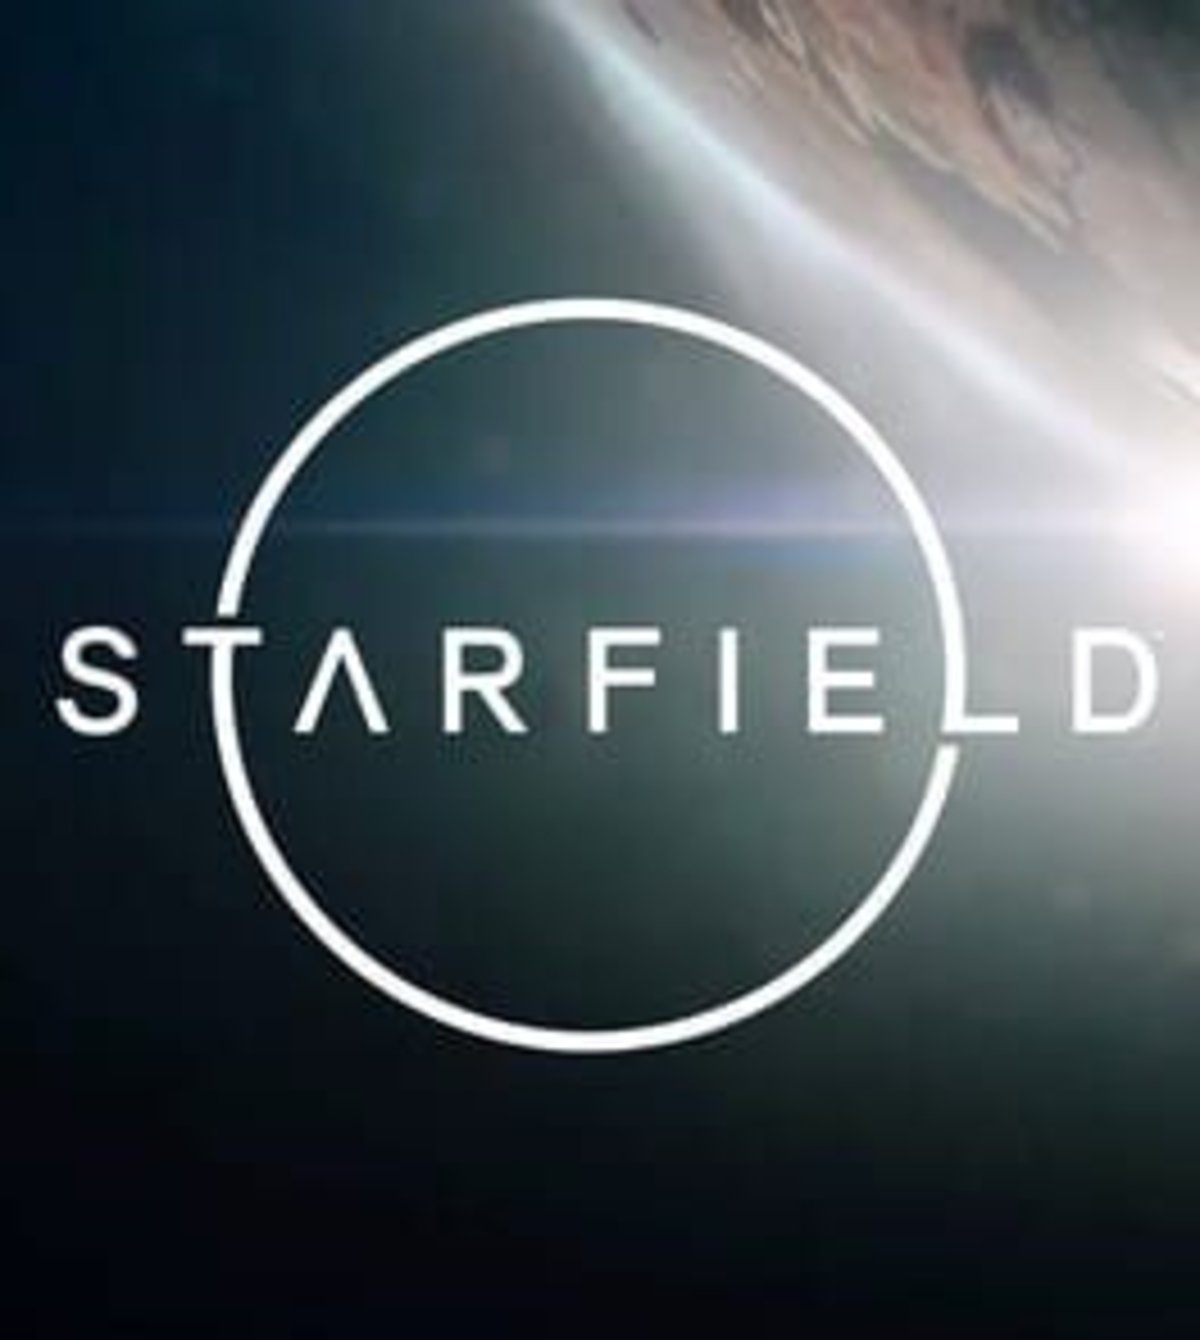 Starfield will arrive with dubbing in Spanish